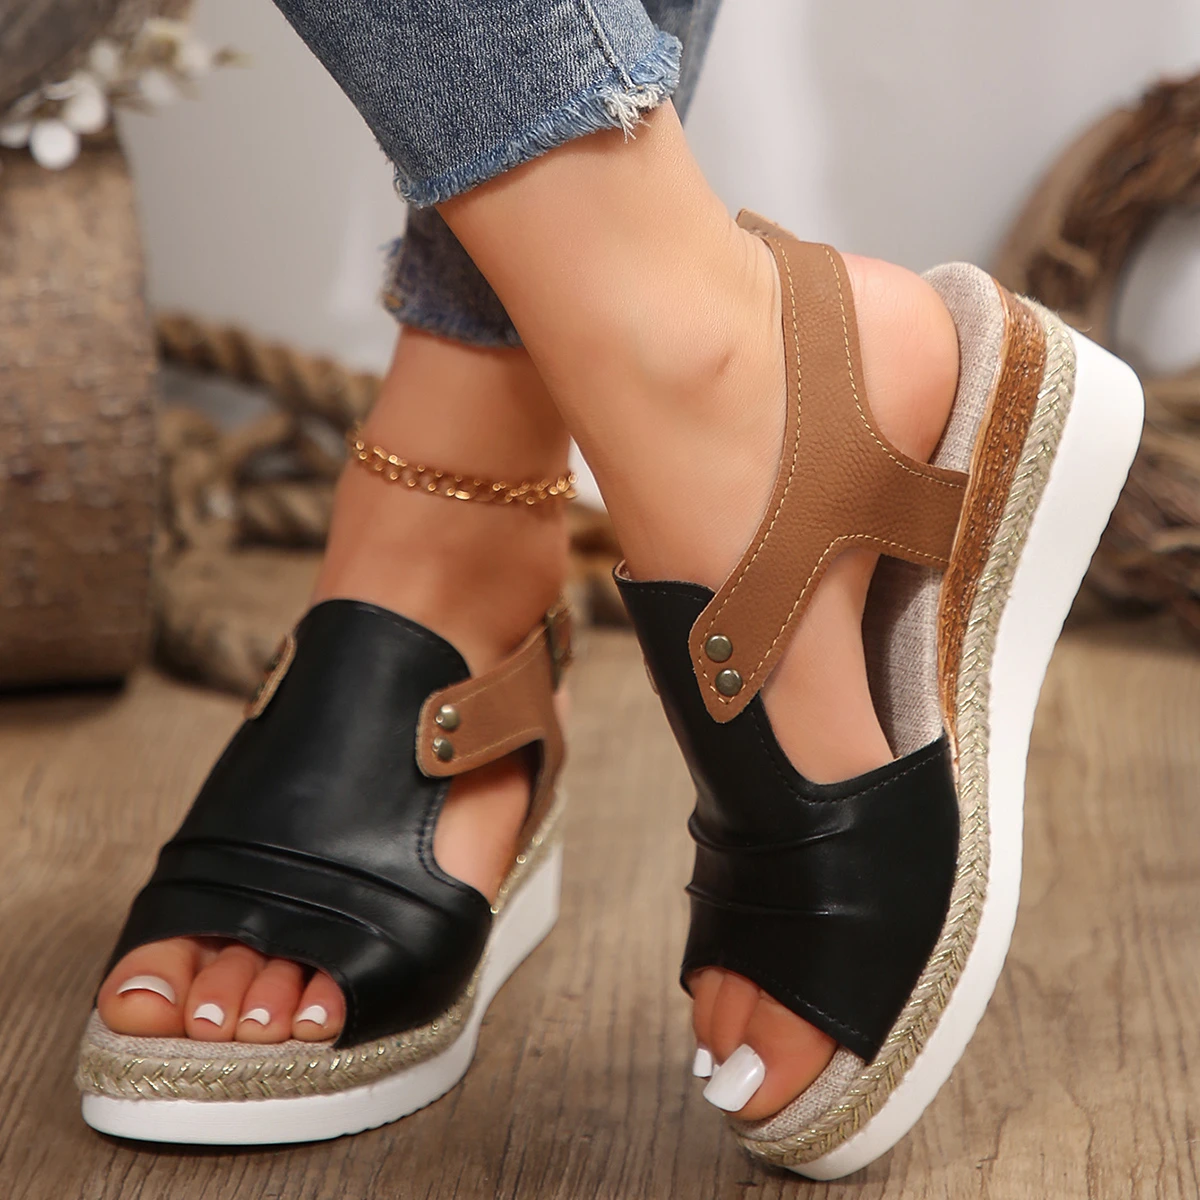 

New Pleated PU Leather Wedge Sandals for Women Back Strap Espadrilles Platform Sandles Woman Summer Thick Bottom Peep Toe Shoes